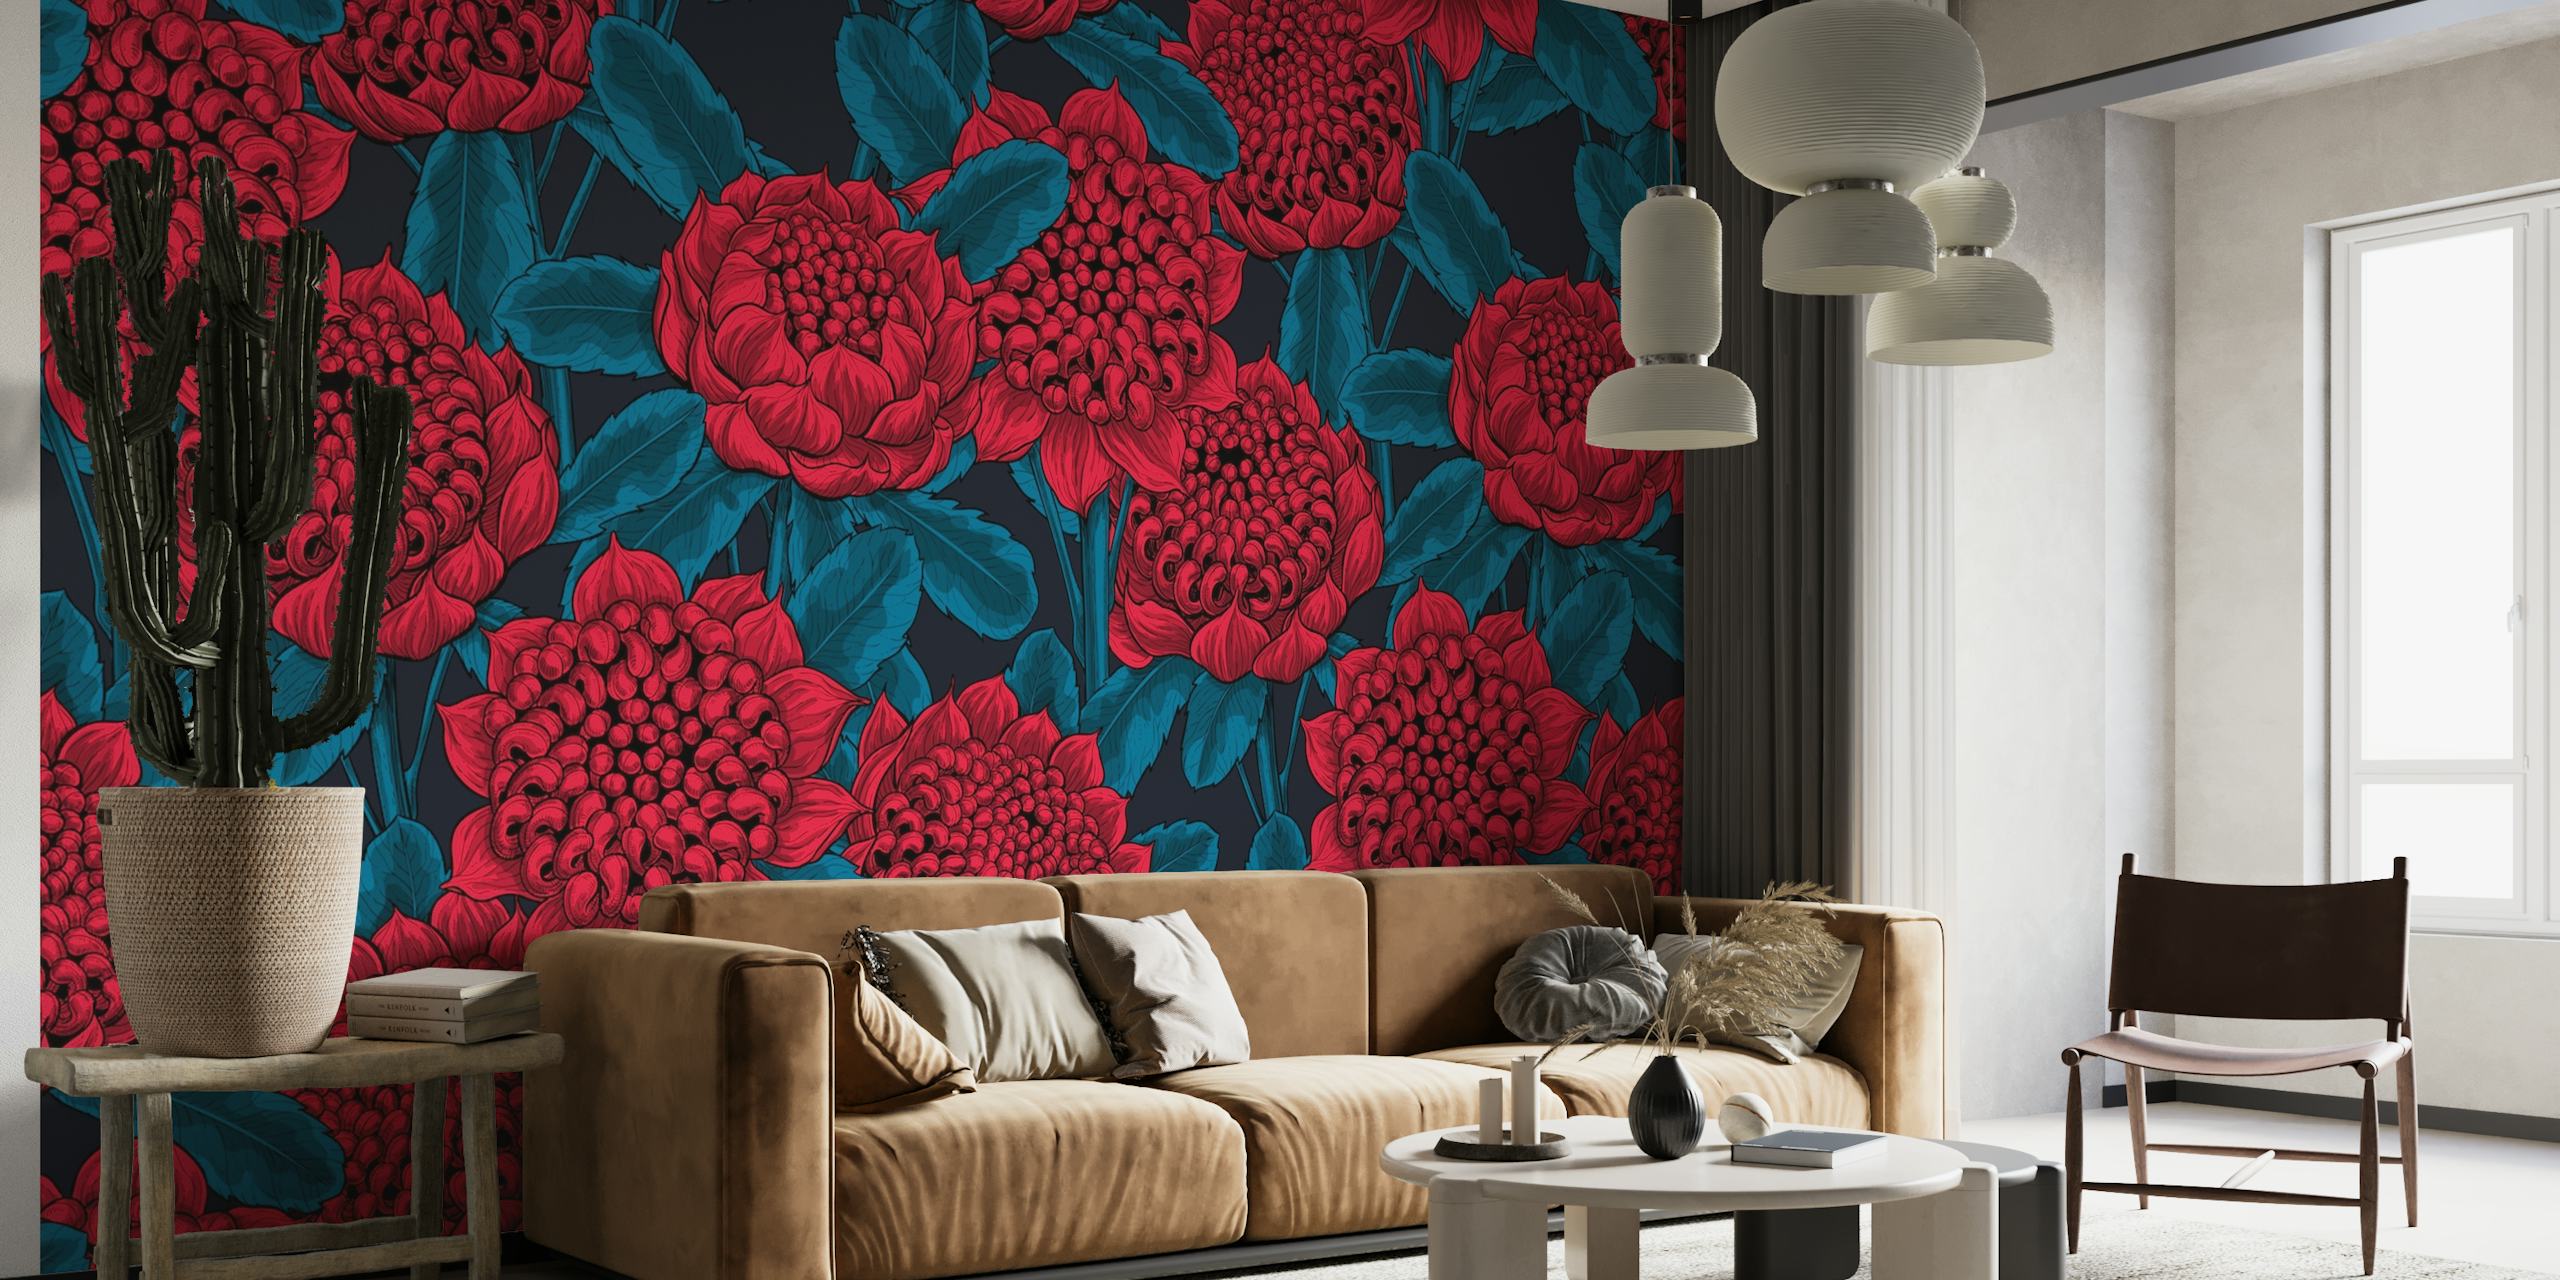 Red Waratah Flowers wall mural on happywall.com featuring lush red florals on a dark background